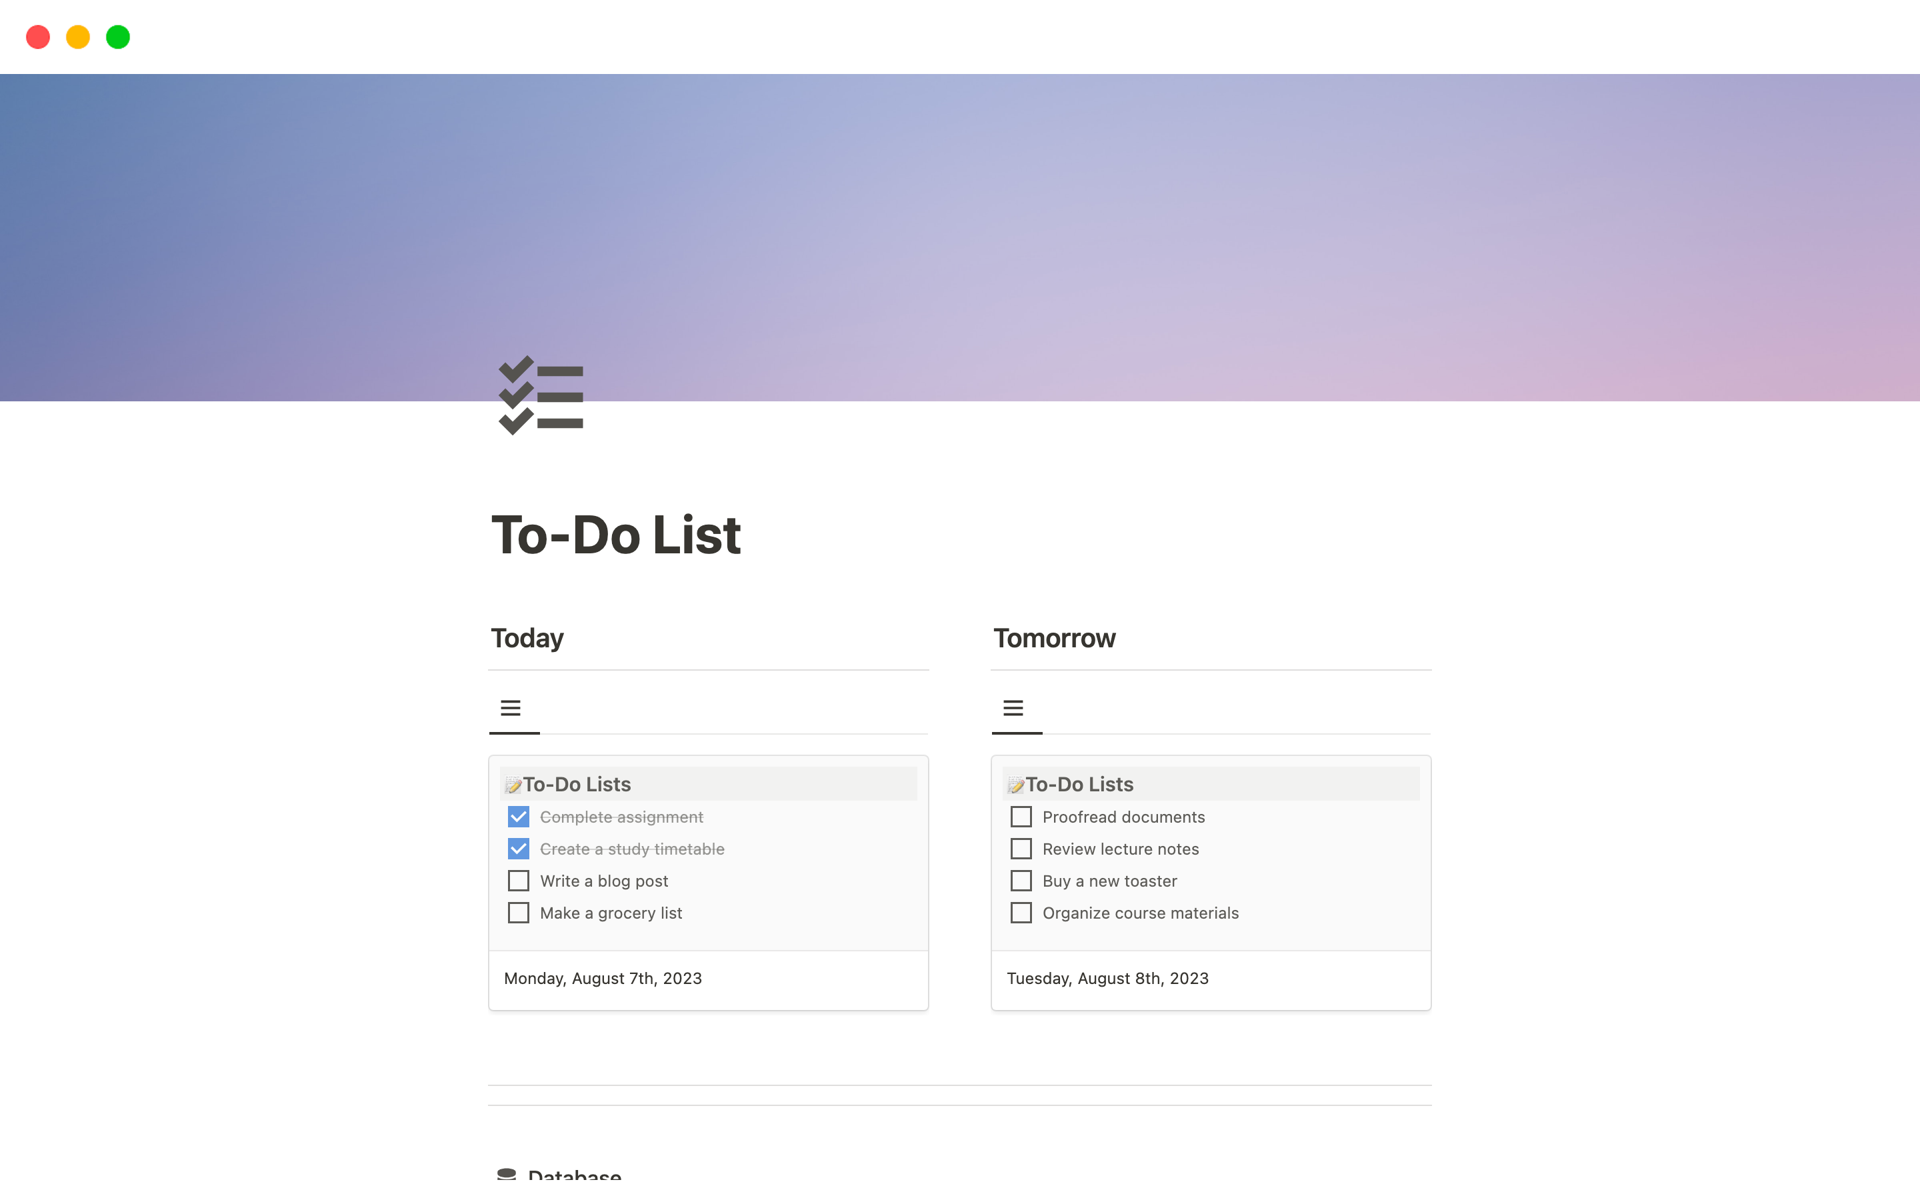 This To-Do List template allows you to add tasks for today and tomorrow to help you stay productive.